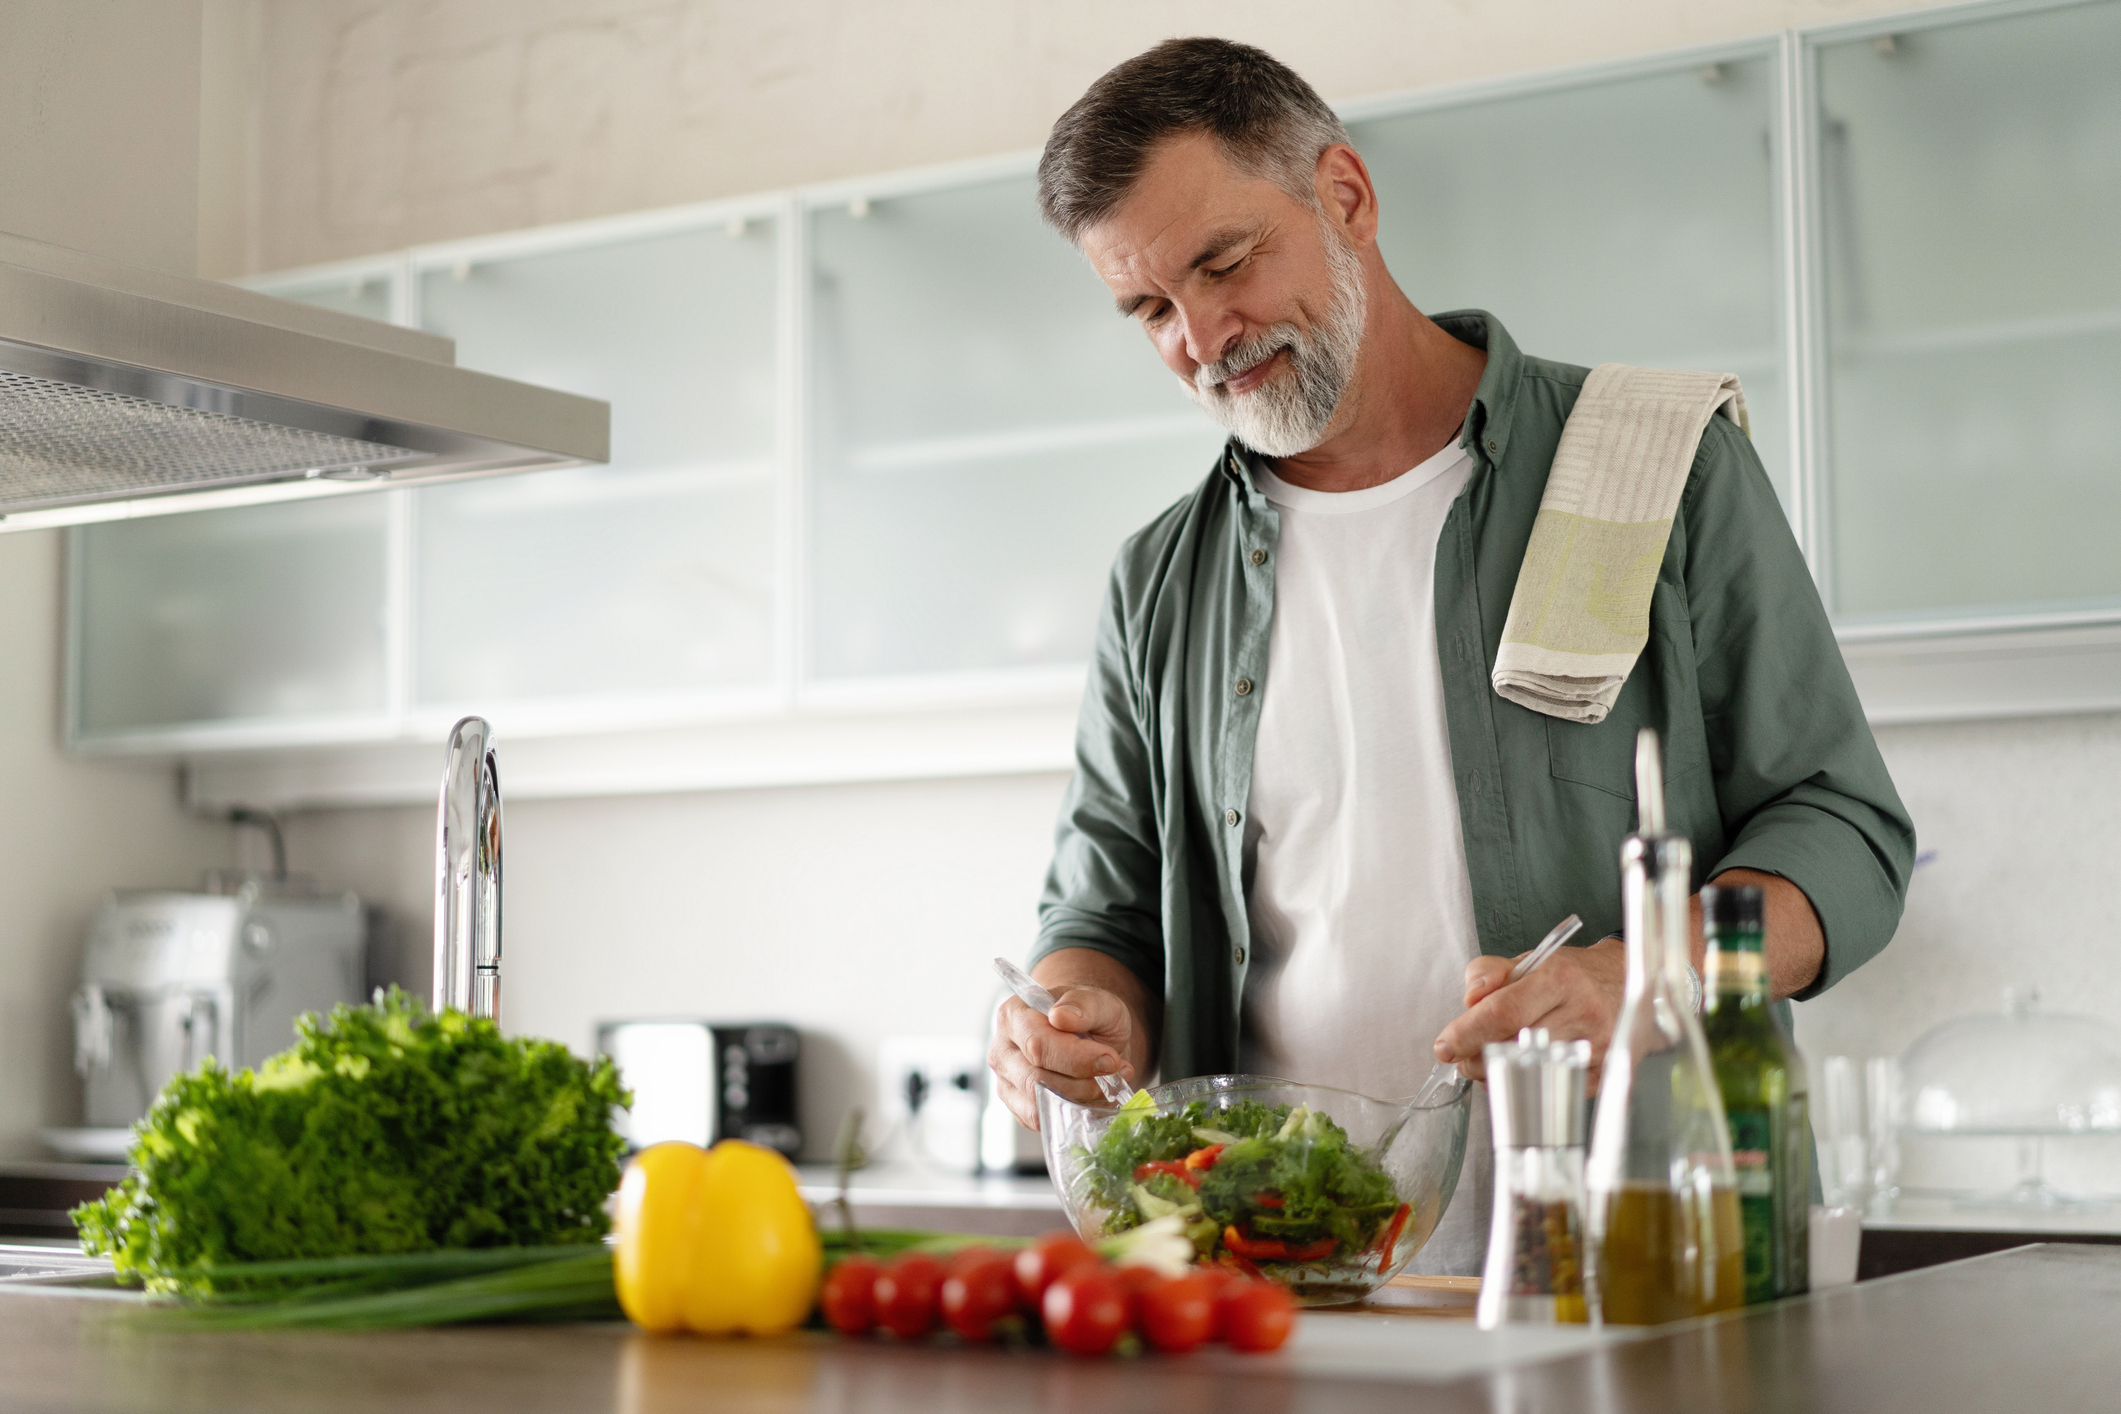 The Role of Nutrition in Men's Health